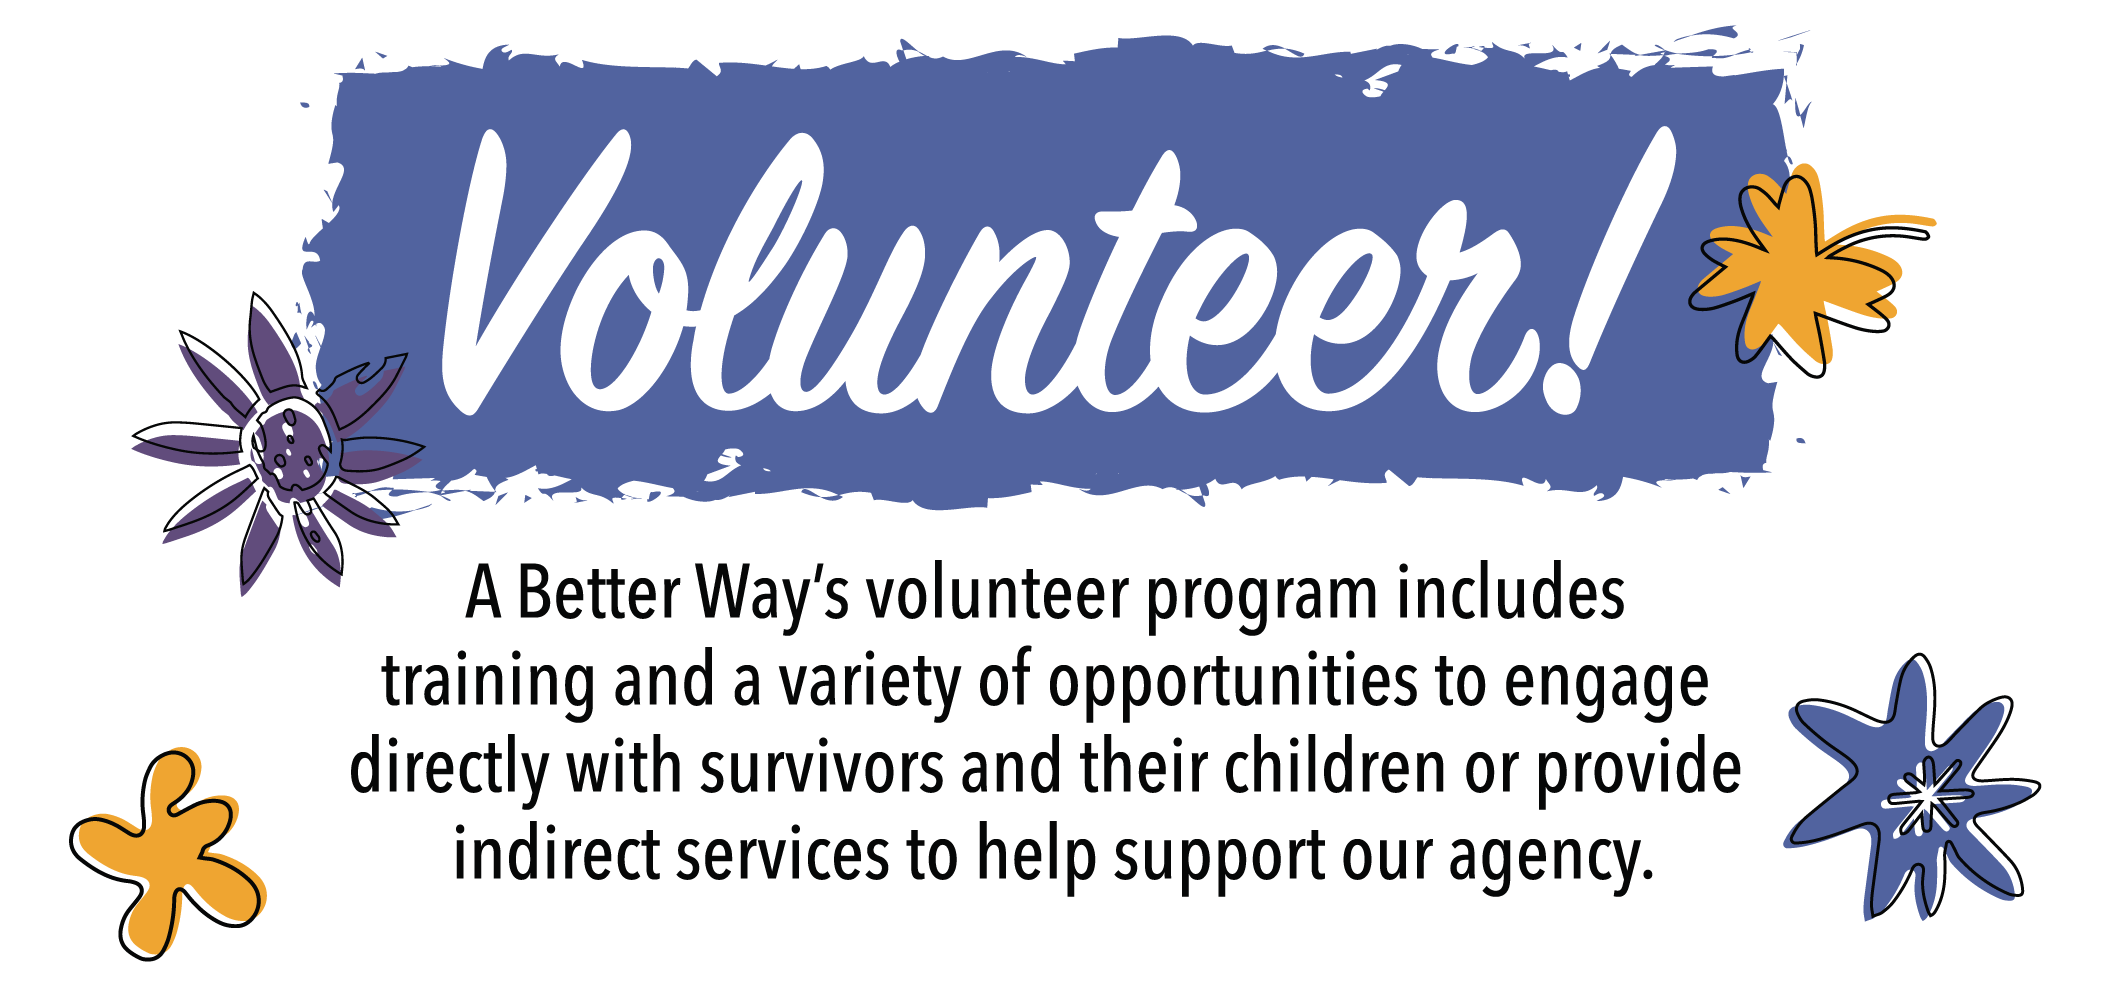 Many volunteer opportunities are available at A better Way. Work one-on-one with our clients or provide in-direct services such as cleaining, lawn care, meal preparation, etc.